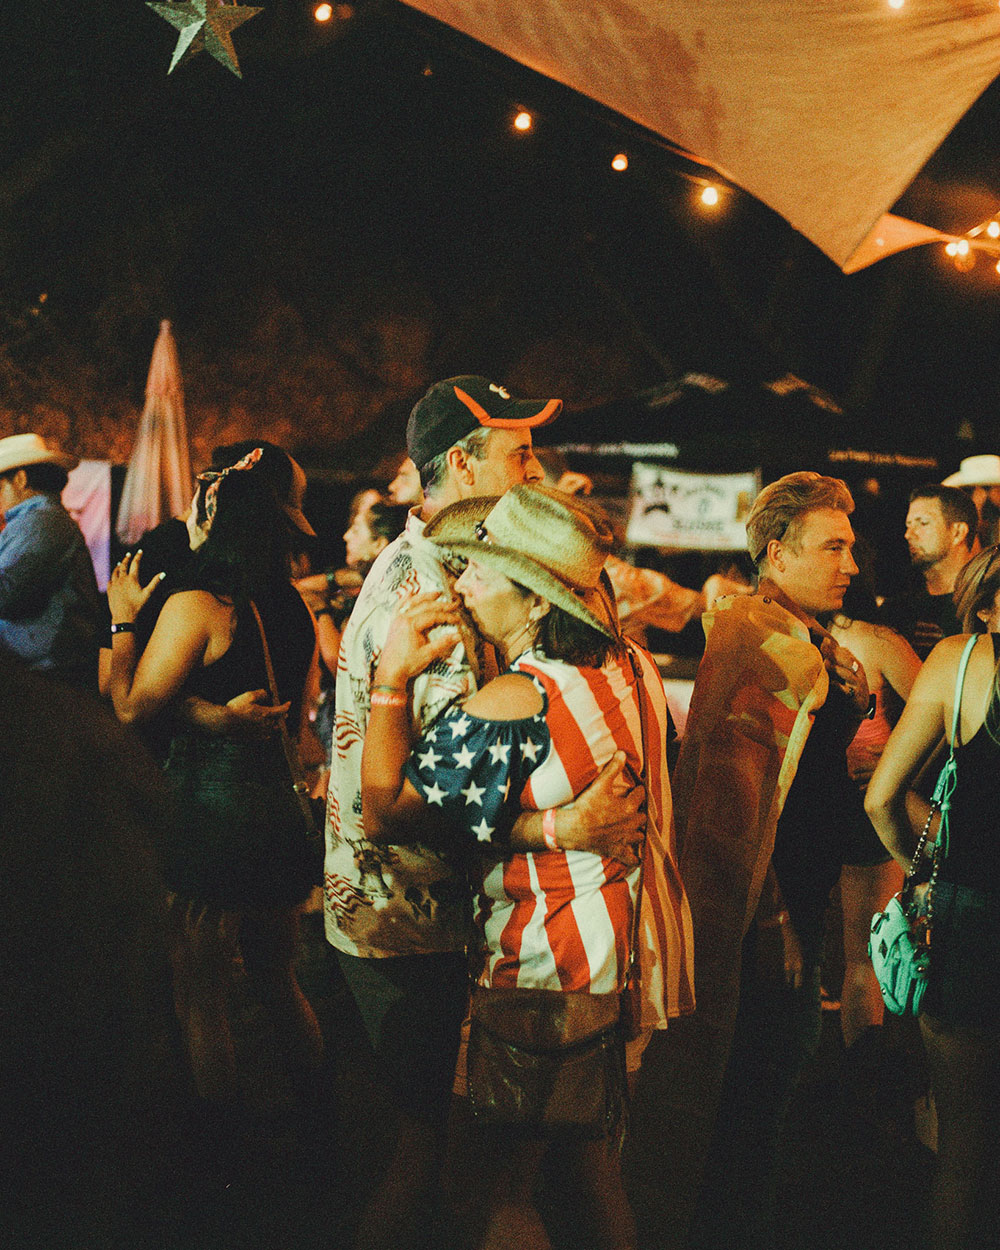 An older couple dance at night. The woman is wearing an American flag shirt In photograph of Folsom Rodeo 60th Anniversary by Cameron Munn